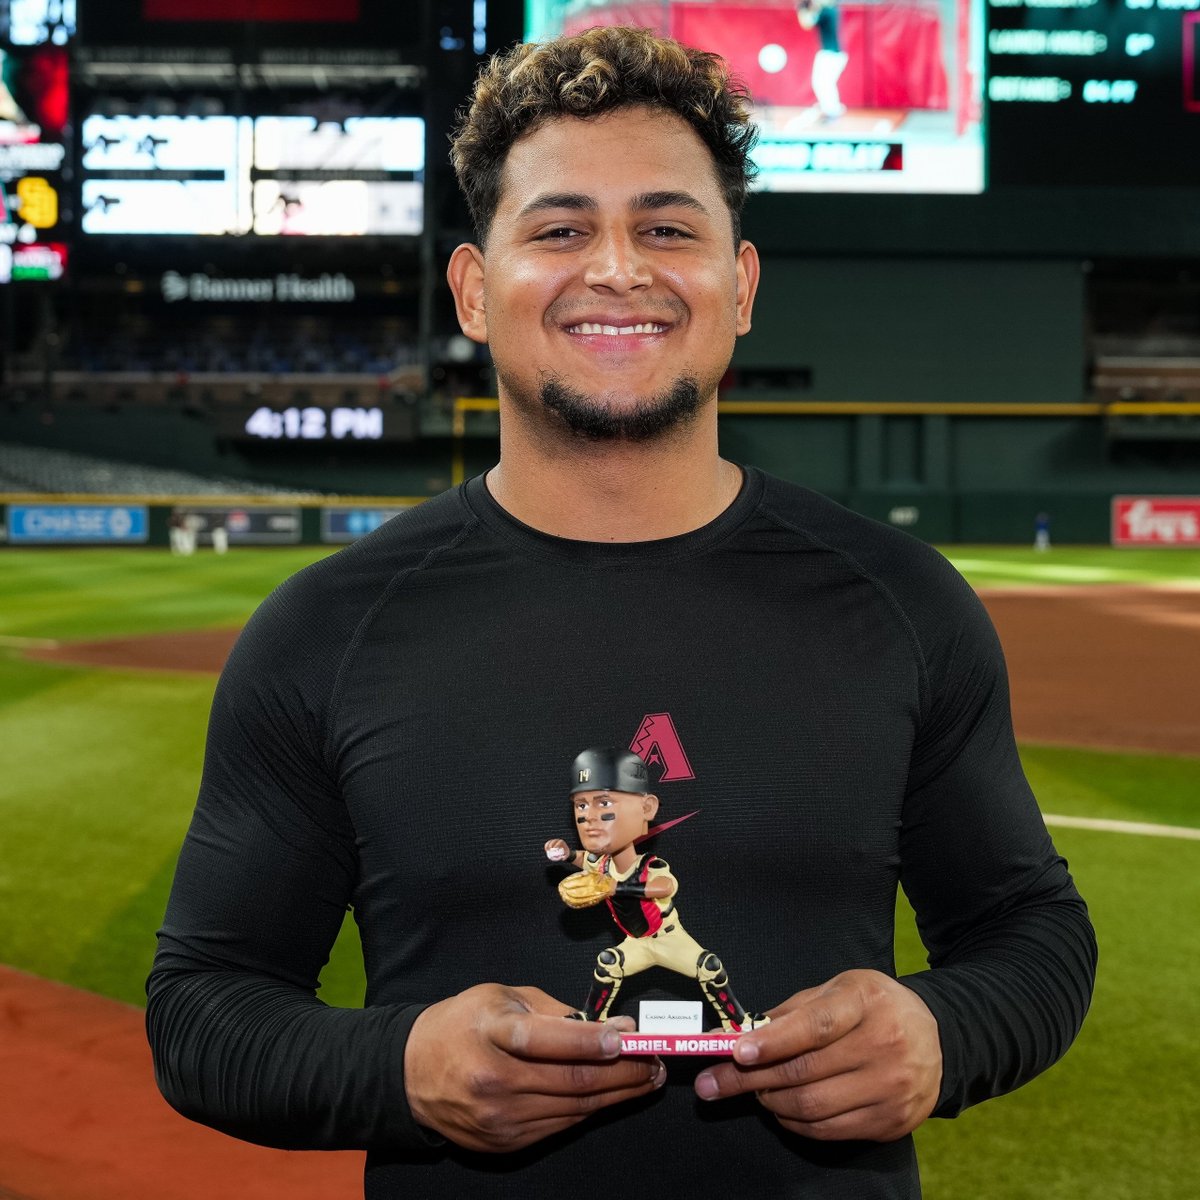 Only one more day until you can get your hands on your own Gabi Gold Glove Bobble!